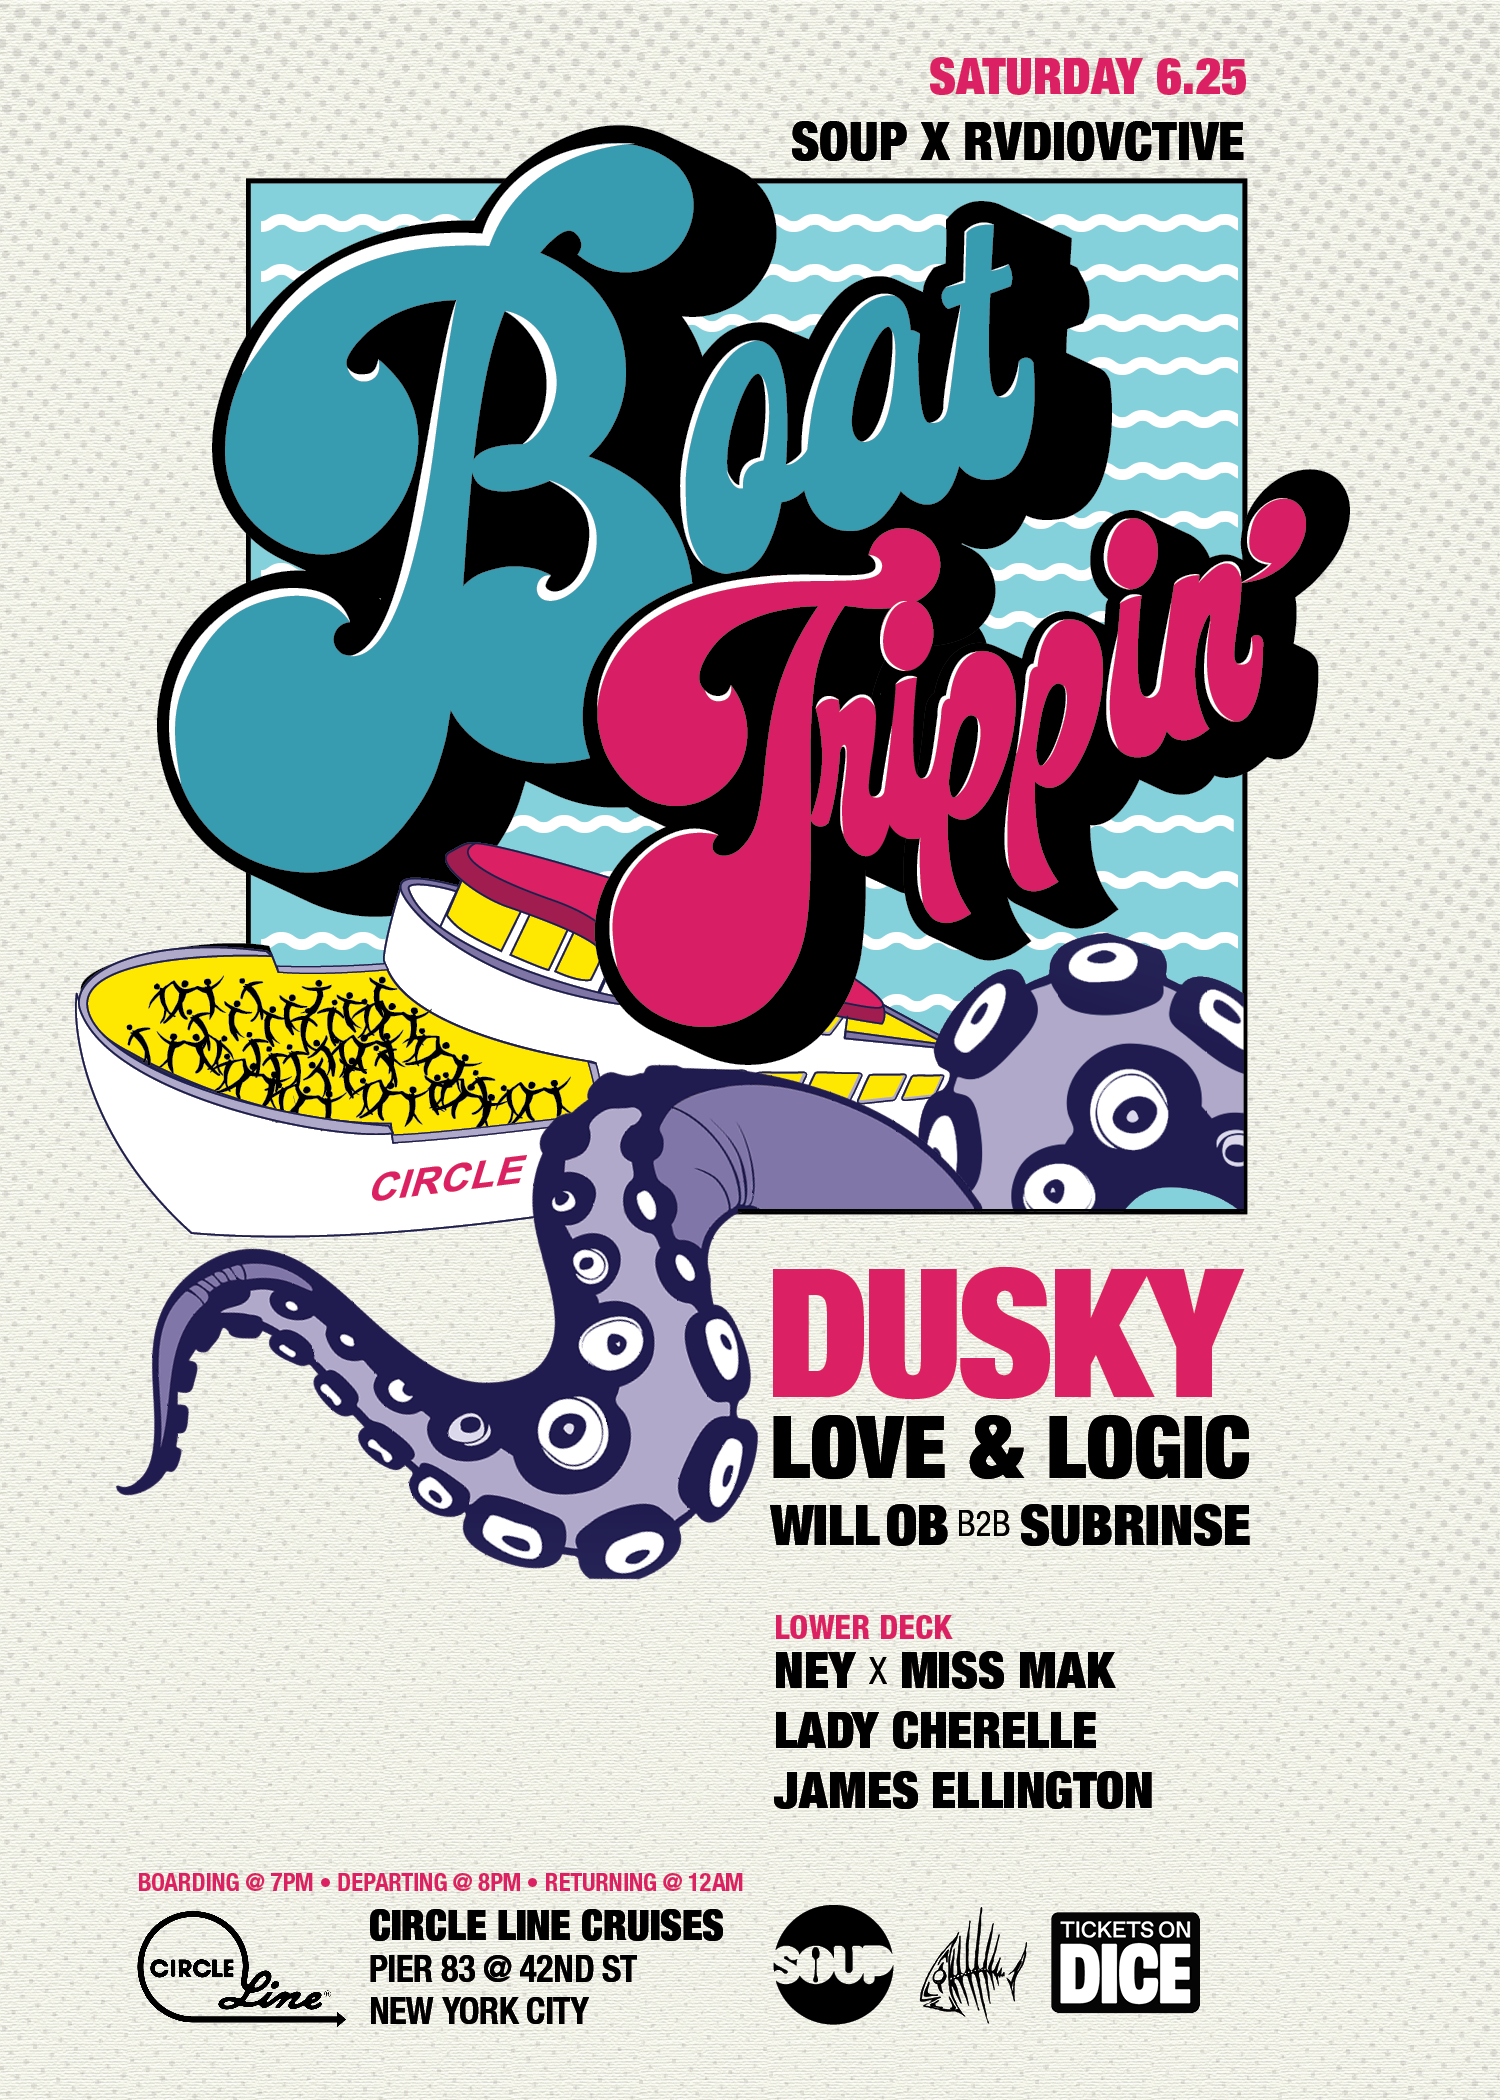 SOUP x RVDIOVCTIVE present: Boat Trippin' with Dusky - フライヤー表